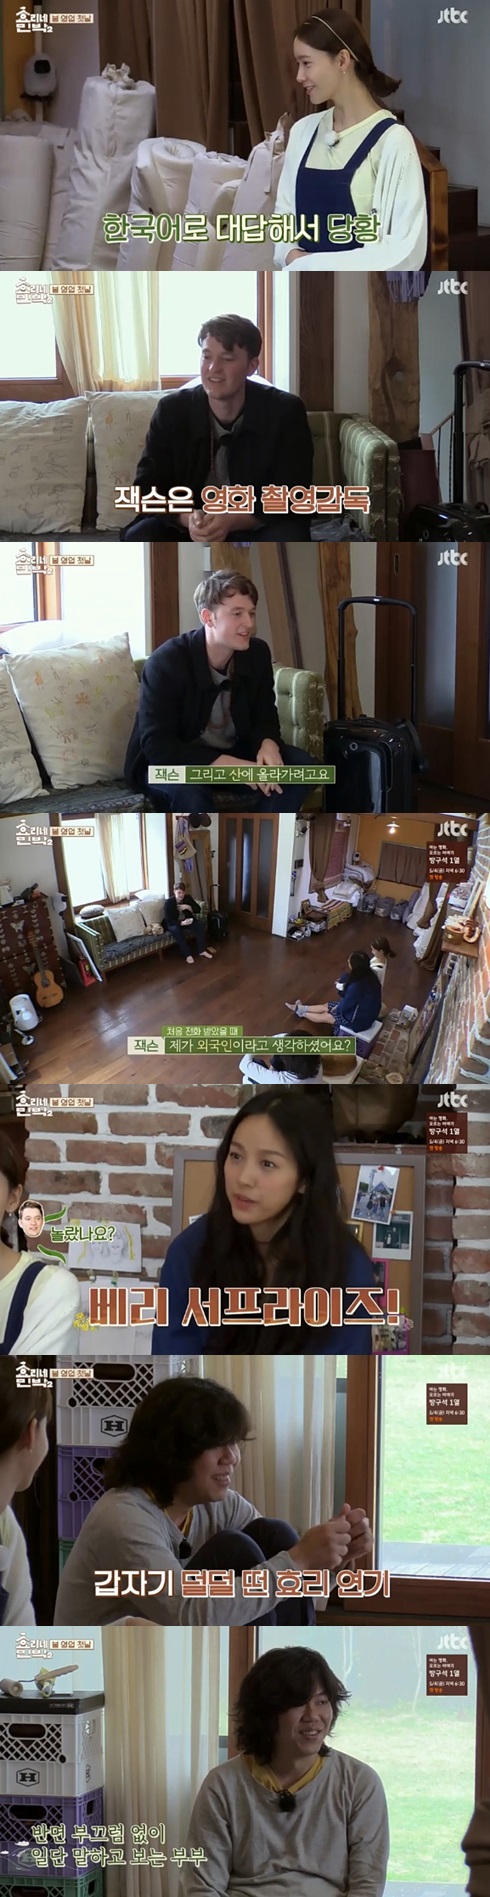 On the general organization channel JTBC Hyeori House B & B 2 which was broadcasted on the 22nd night, the appearance of the inn which started the business in winter was finished after finishing sales in winter.For the first time in the Hyeori House B & B 2 of the day a customer in the United States appeared.In a panic, Yoona tried to be connected with Lee Hyori, Lee Sang-soon, but they sent to Yoona, Please go and share your stories together.Subsequently Lee Hyori left support fire and Jackson praised Lee Hyori as very good English language.I continued and talked to Lee Hyori smoothly.Jackson, film director, said: I love traveling alone.I was about to climb the mountain, explained the travel opportunity.Lee Sang-soon, who told Lee Hyori that he was a very surprised about the fact that he is a foreign customer, said jokingly that he was scared.However, regarding English language phobia Lee Sang-soon said, We are not shy.I will tell you once. 